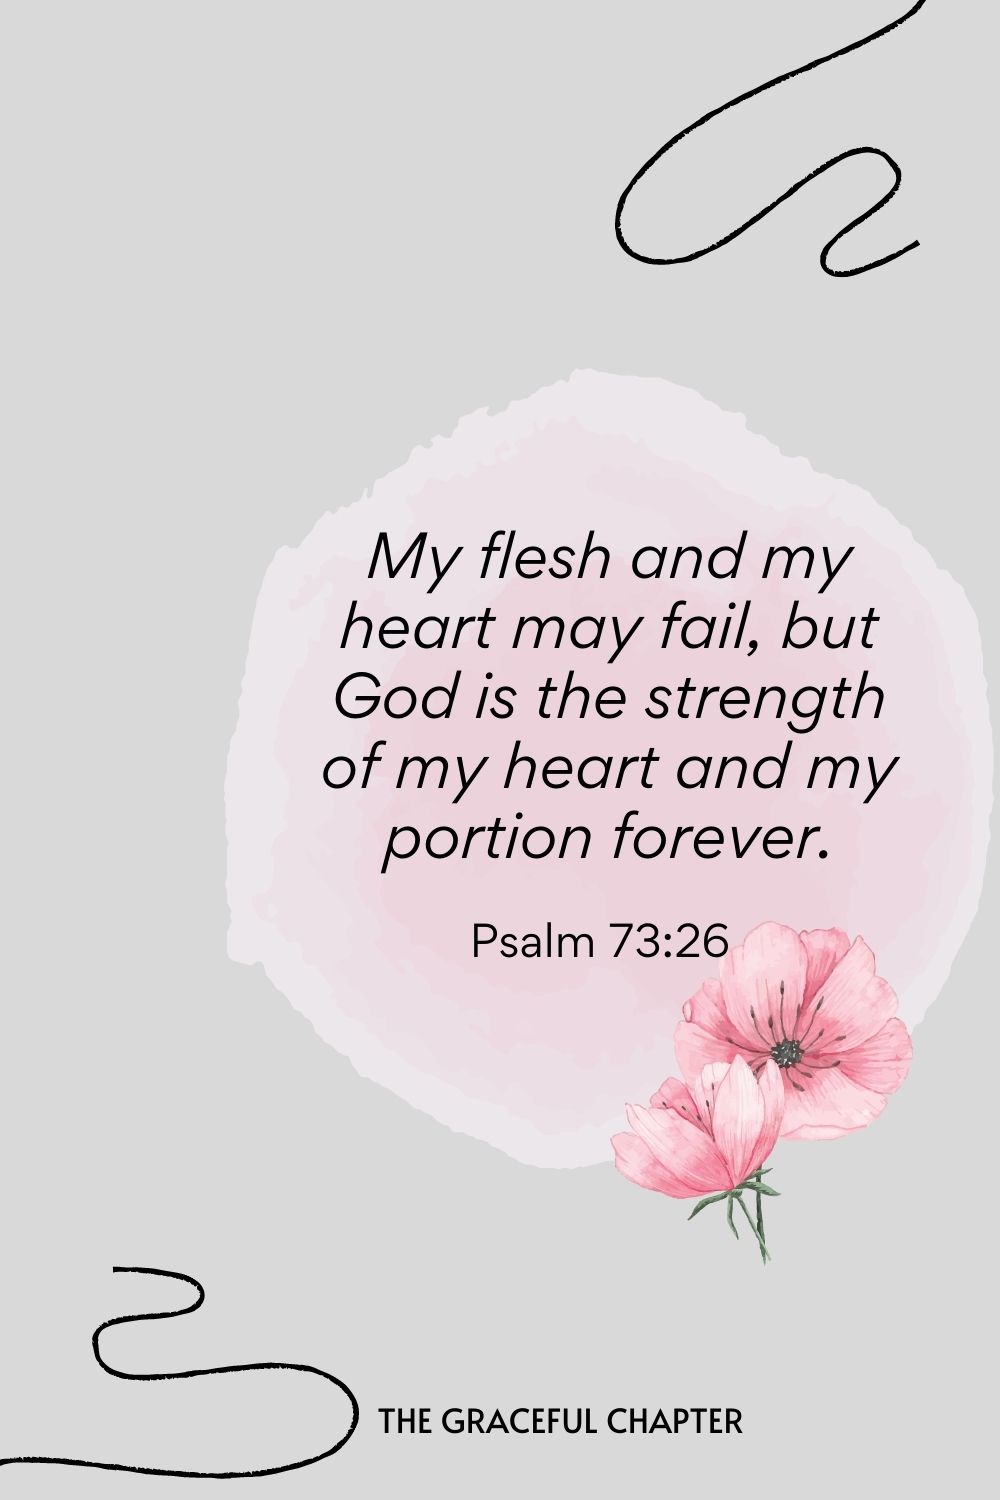 My flesh and my heart may fail, but God is the strength of my heart and my portion forever.  Psalm 73:26